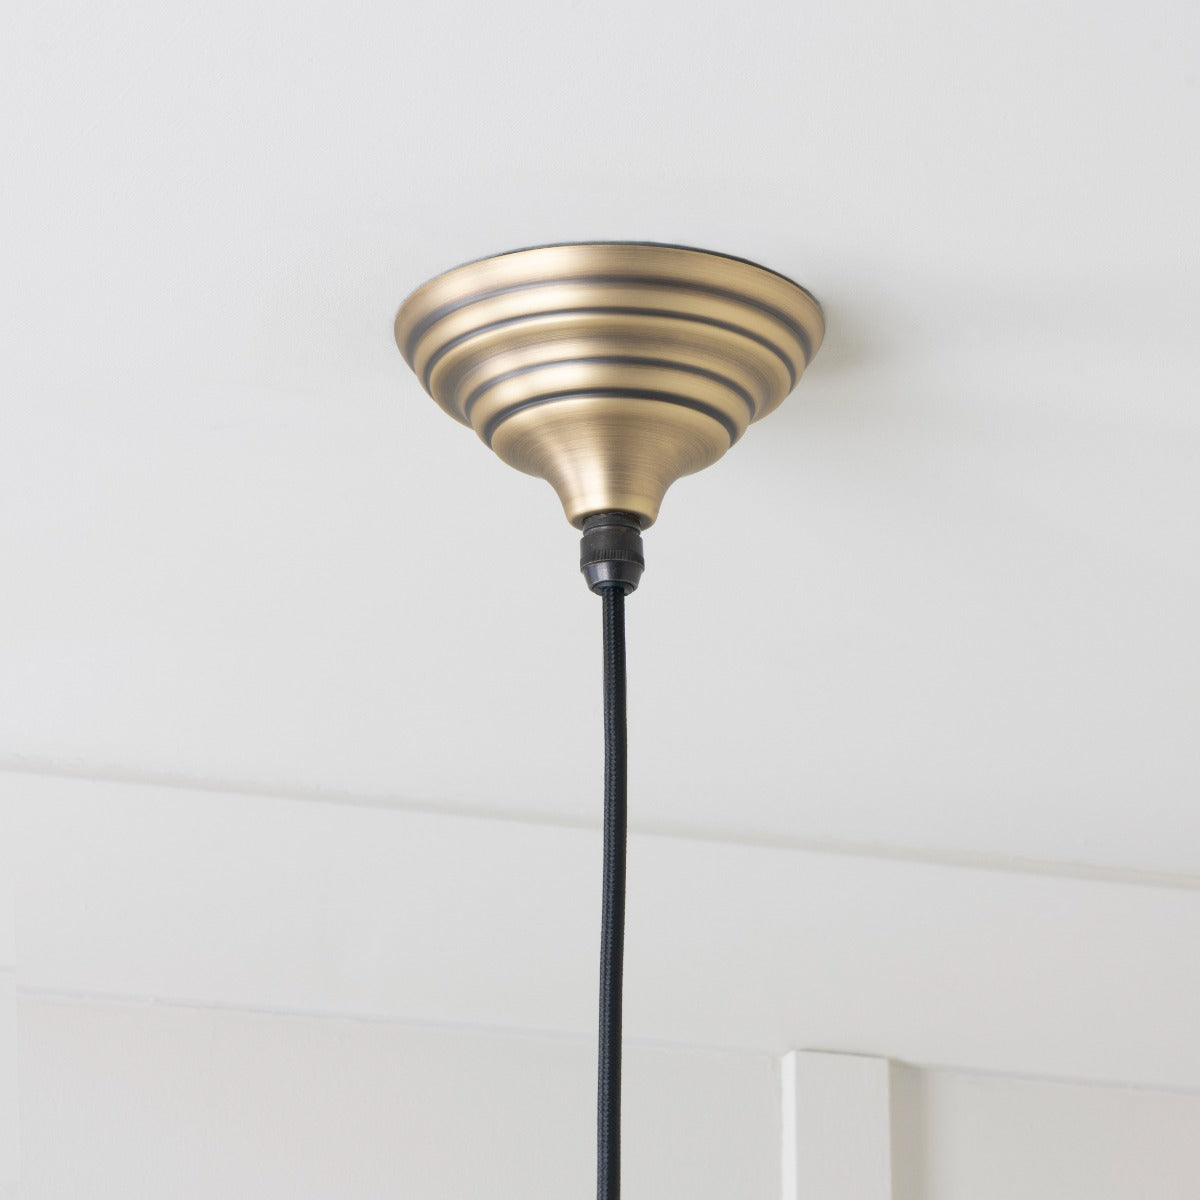 From the Anvil Aged Brass Hockley Pendant